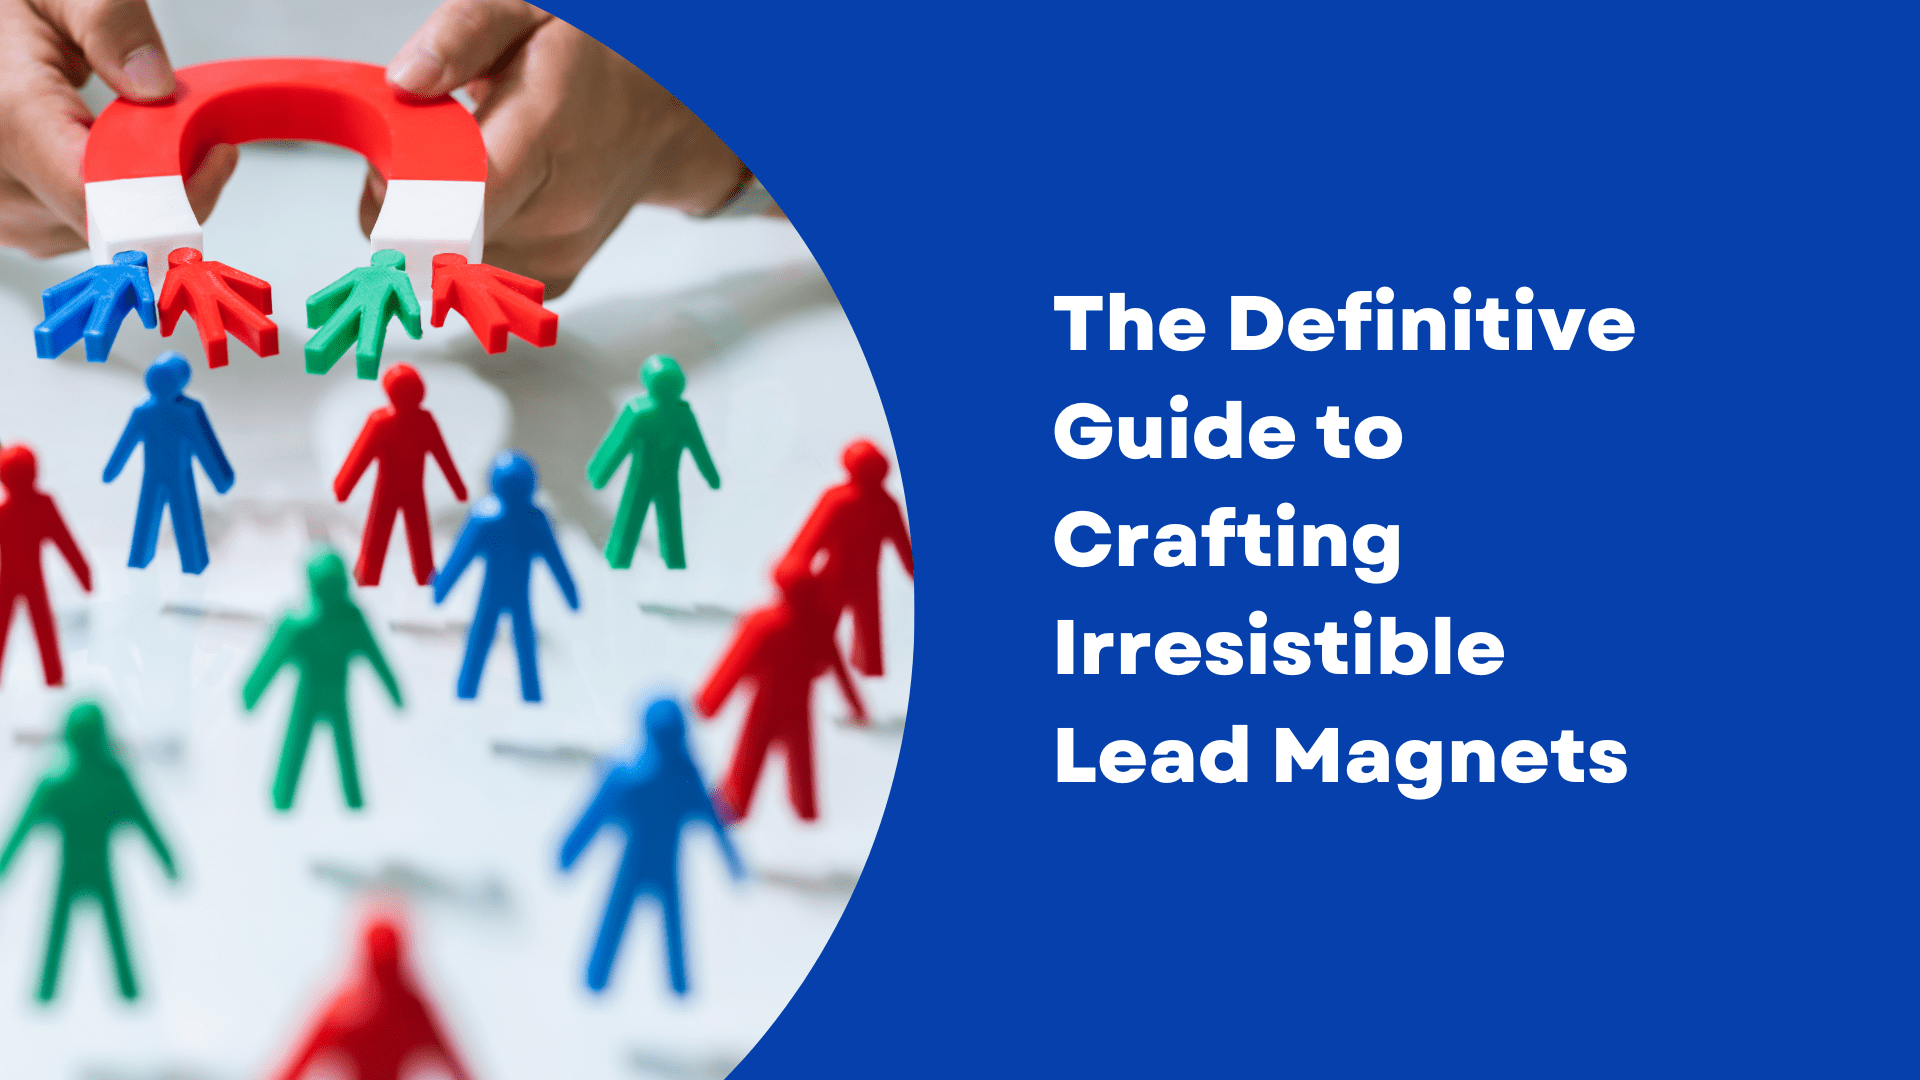 The Definitive Guide To Crafting Irresistible Lead Magnets | Beau B Content